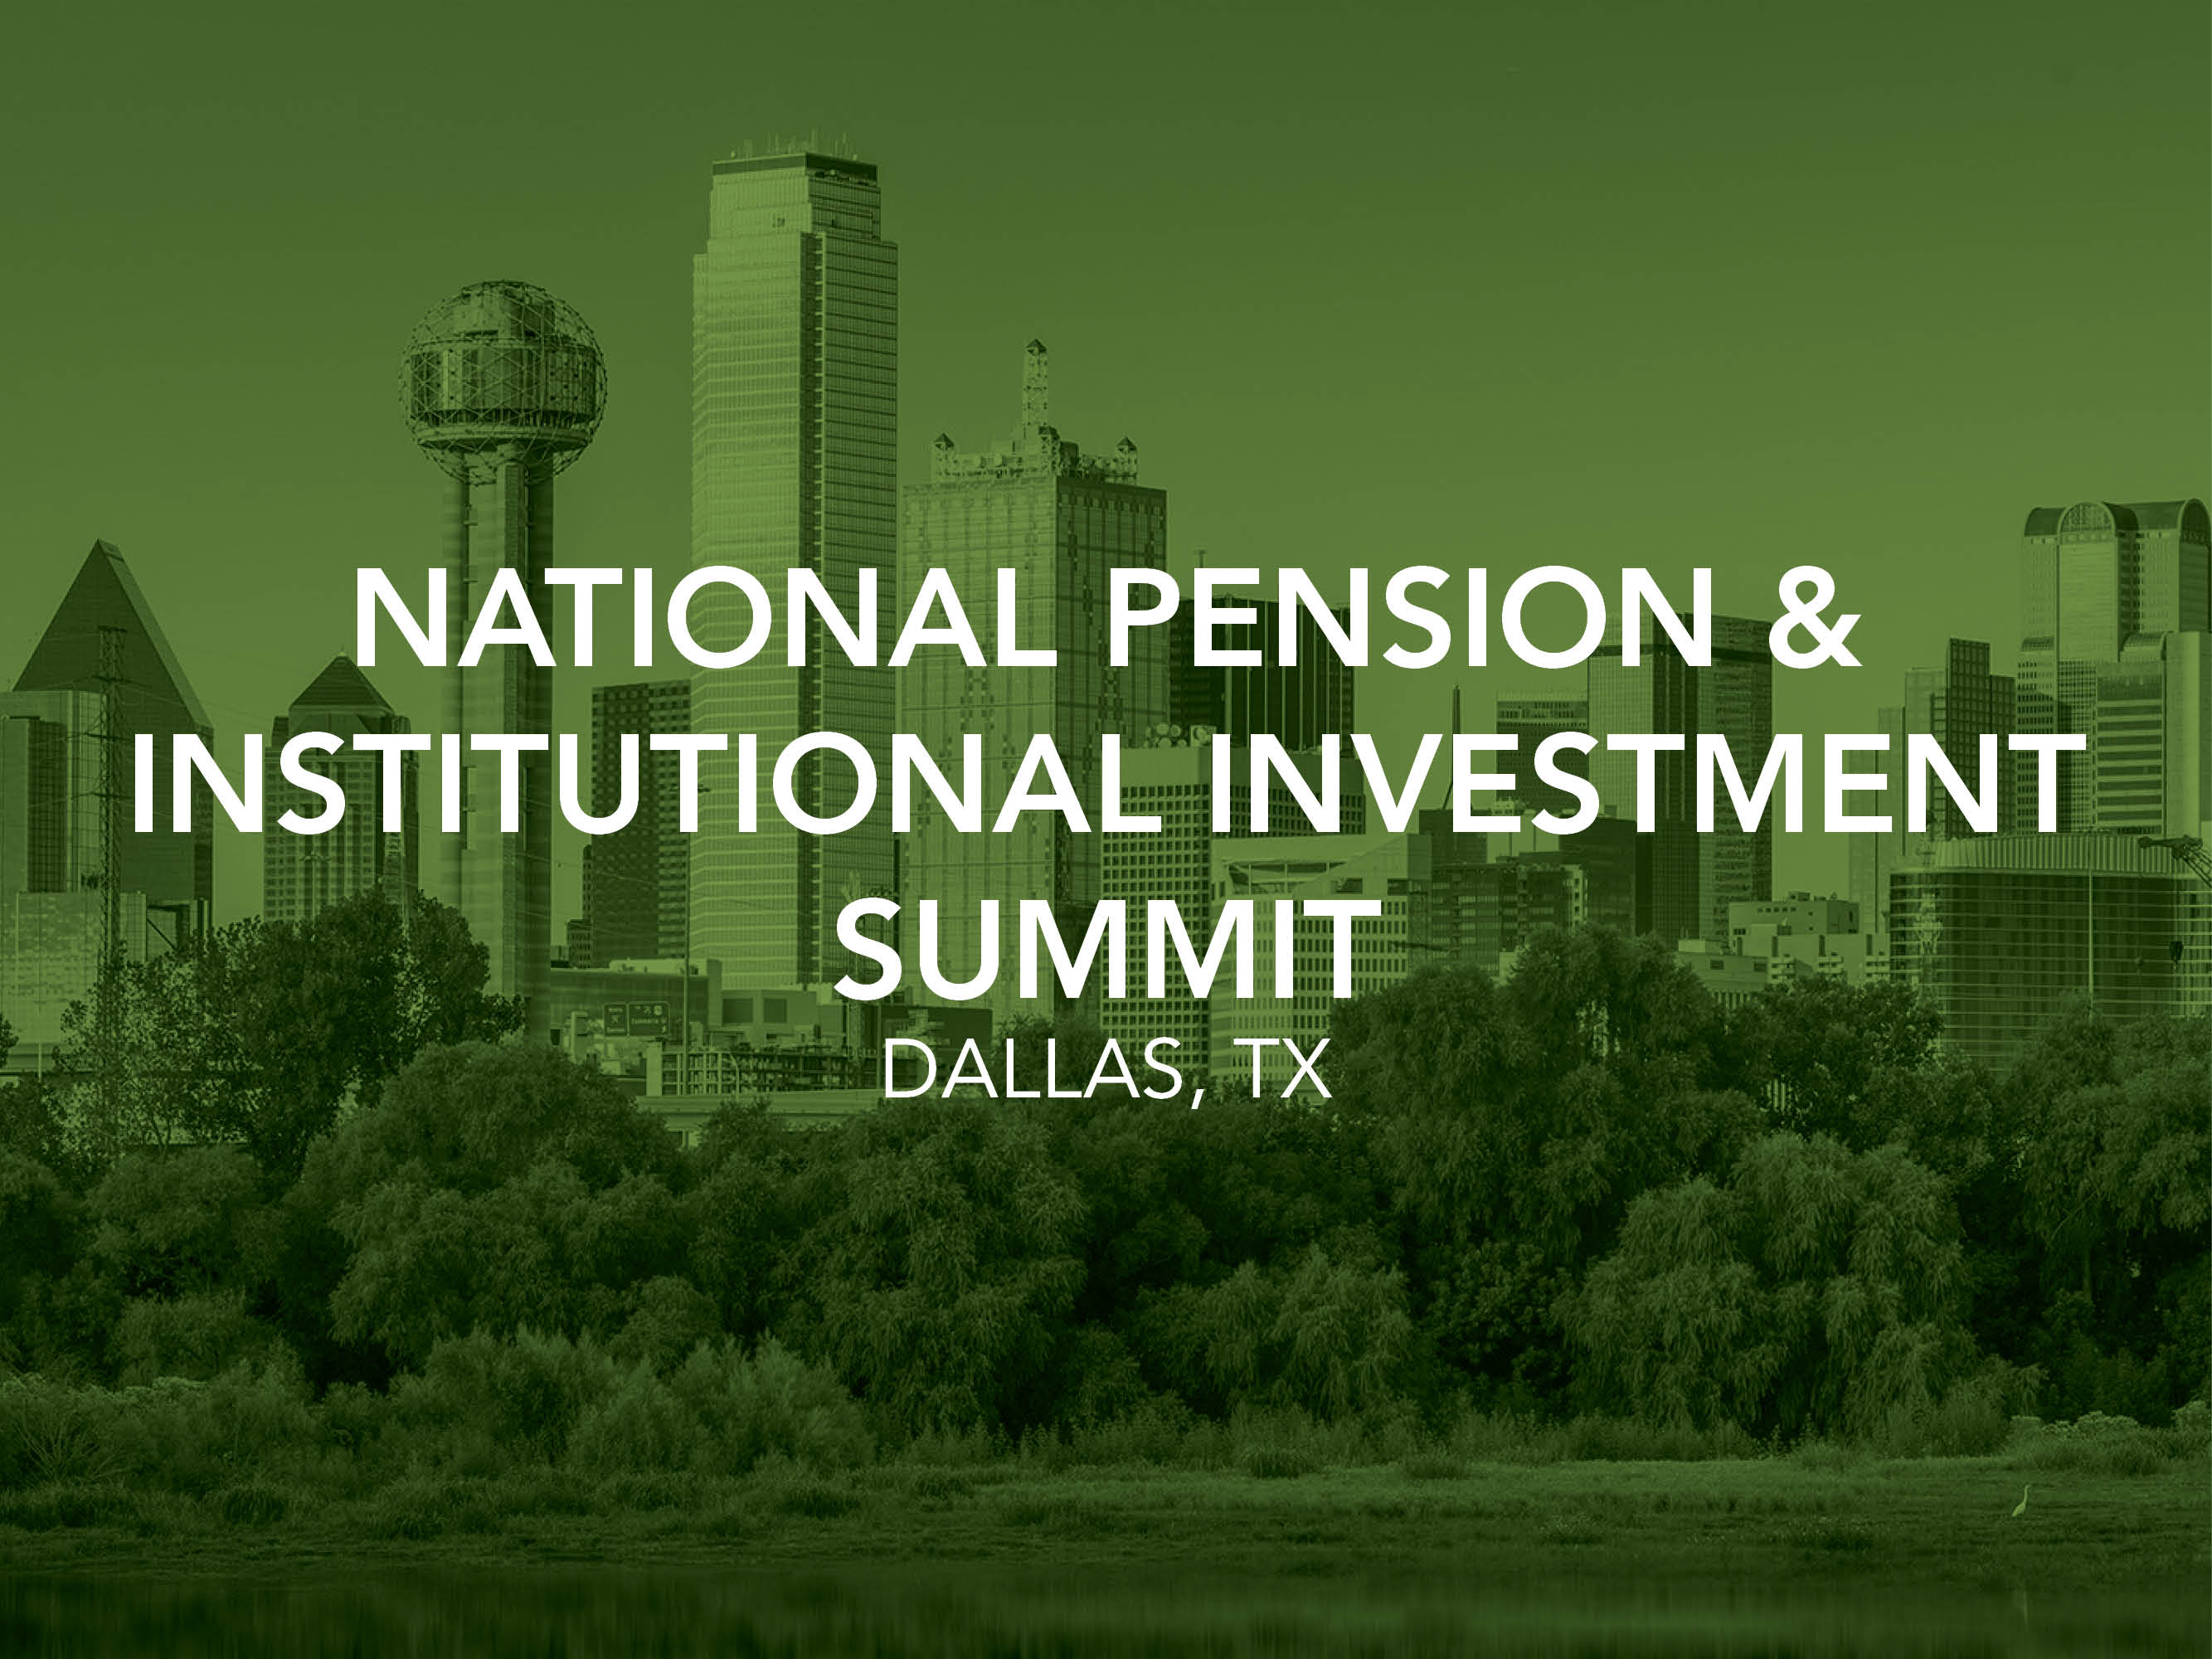 25th Annual National Pension & Institutional Investment Summit